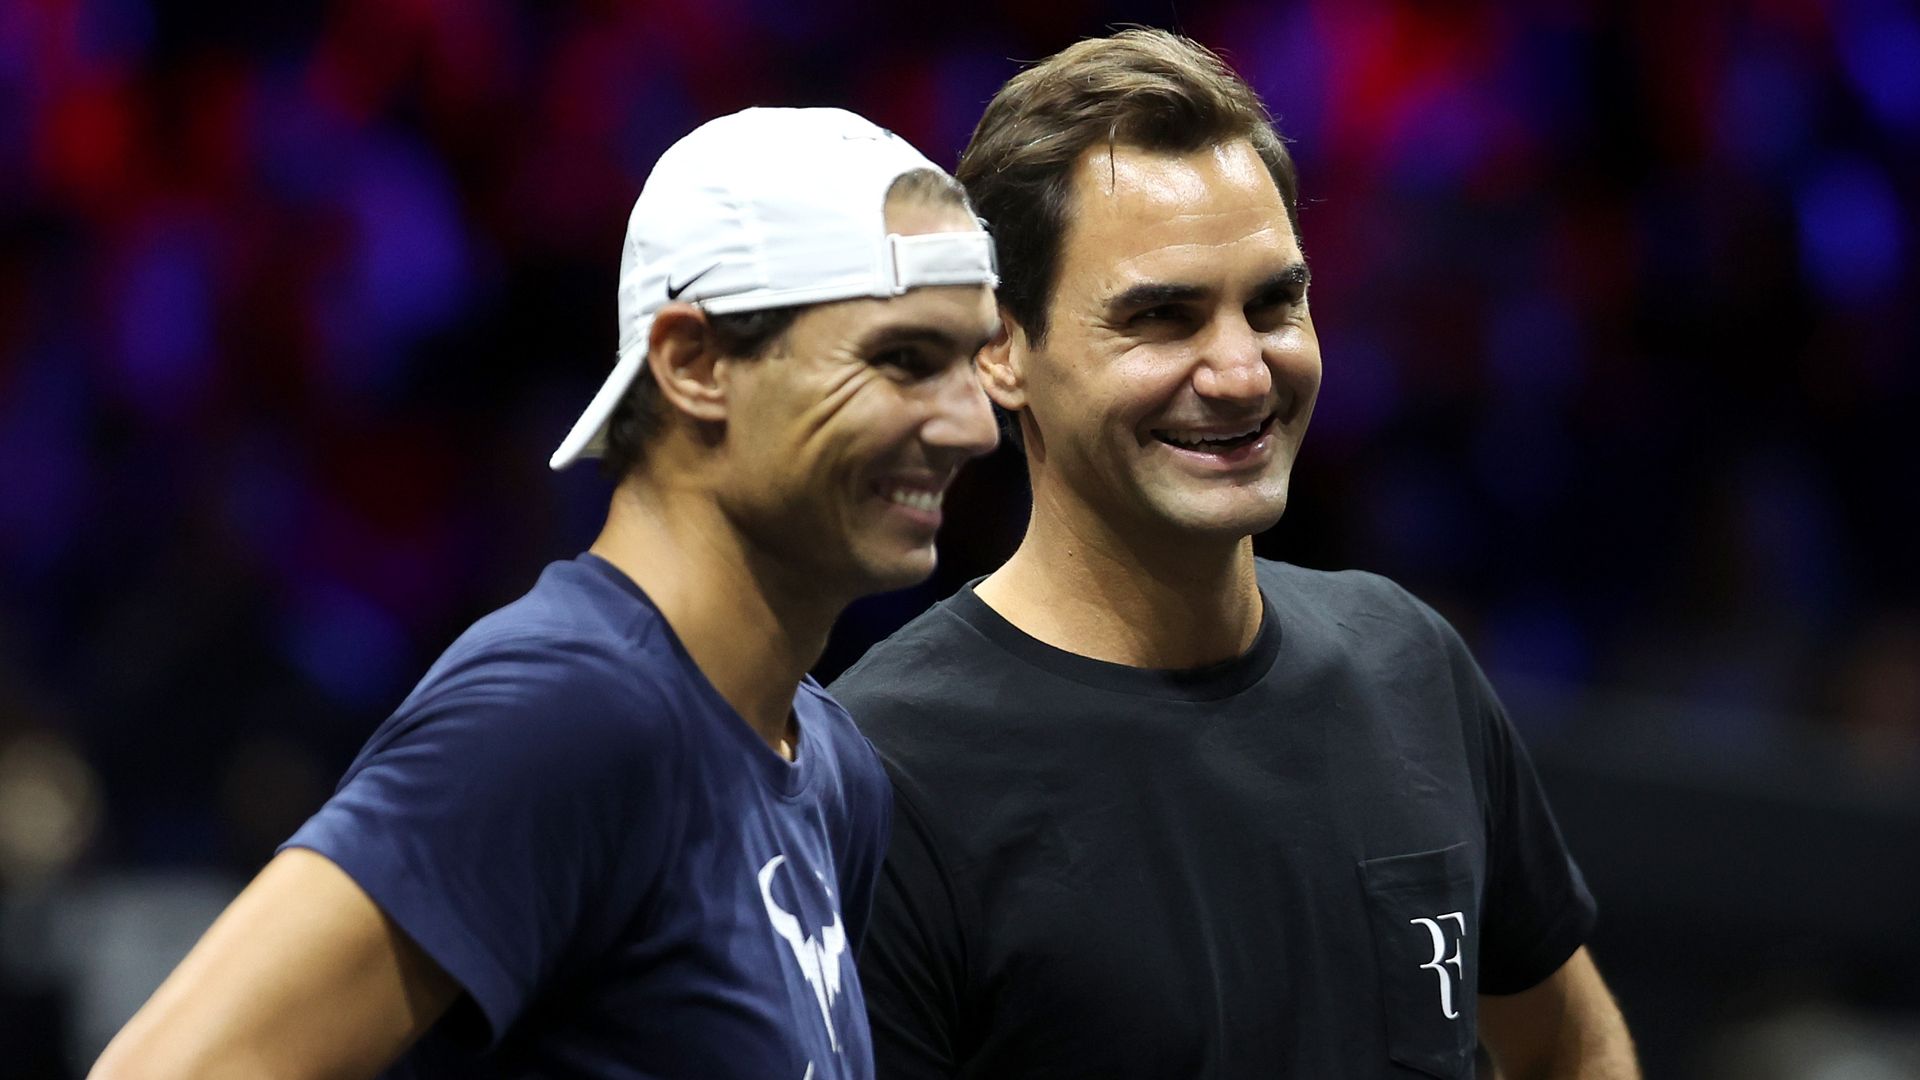 Fed and Nadal